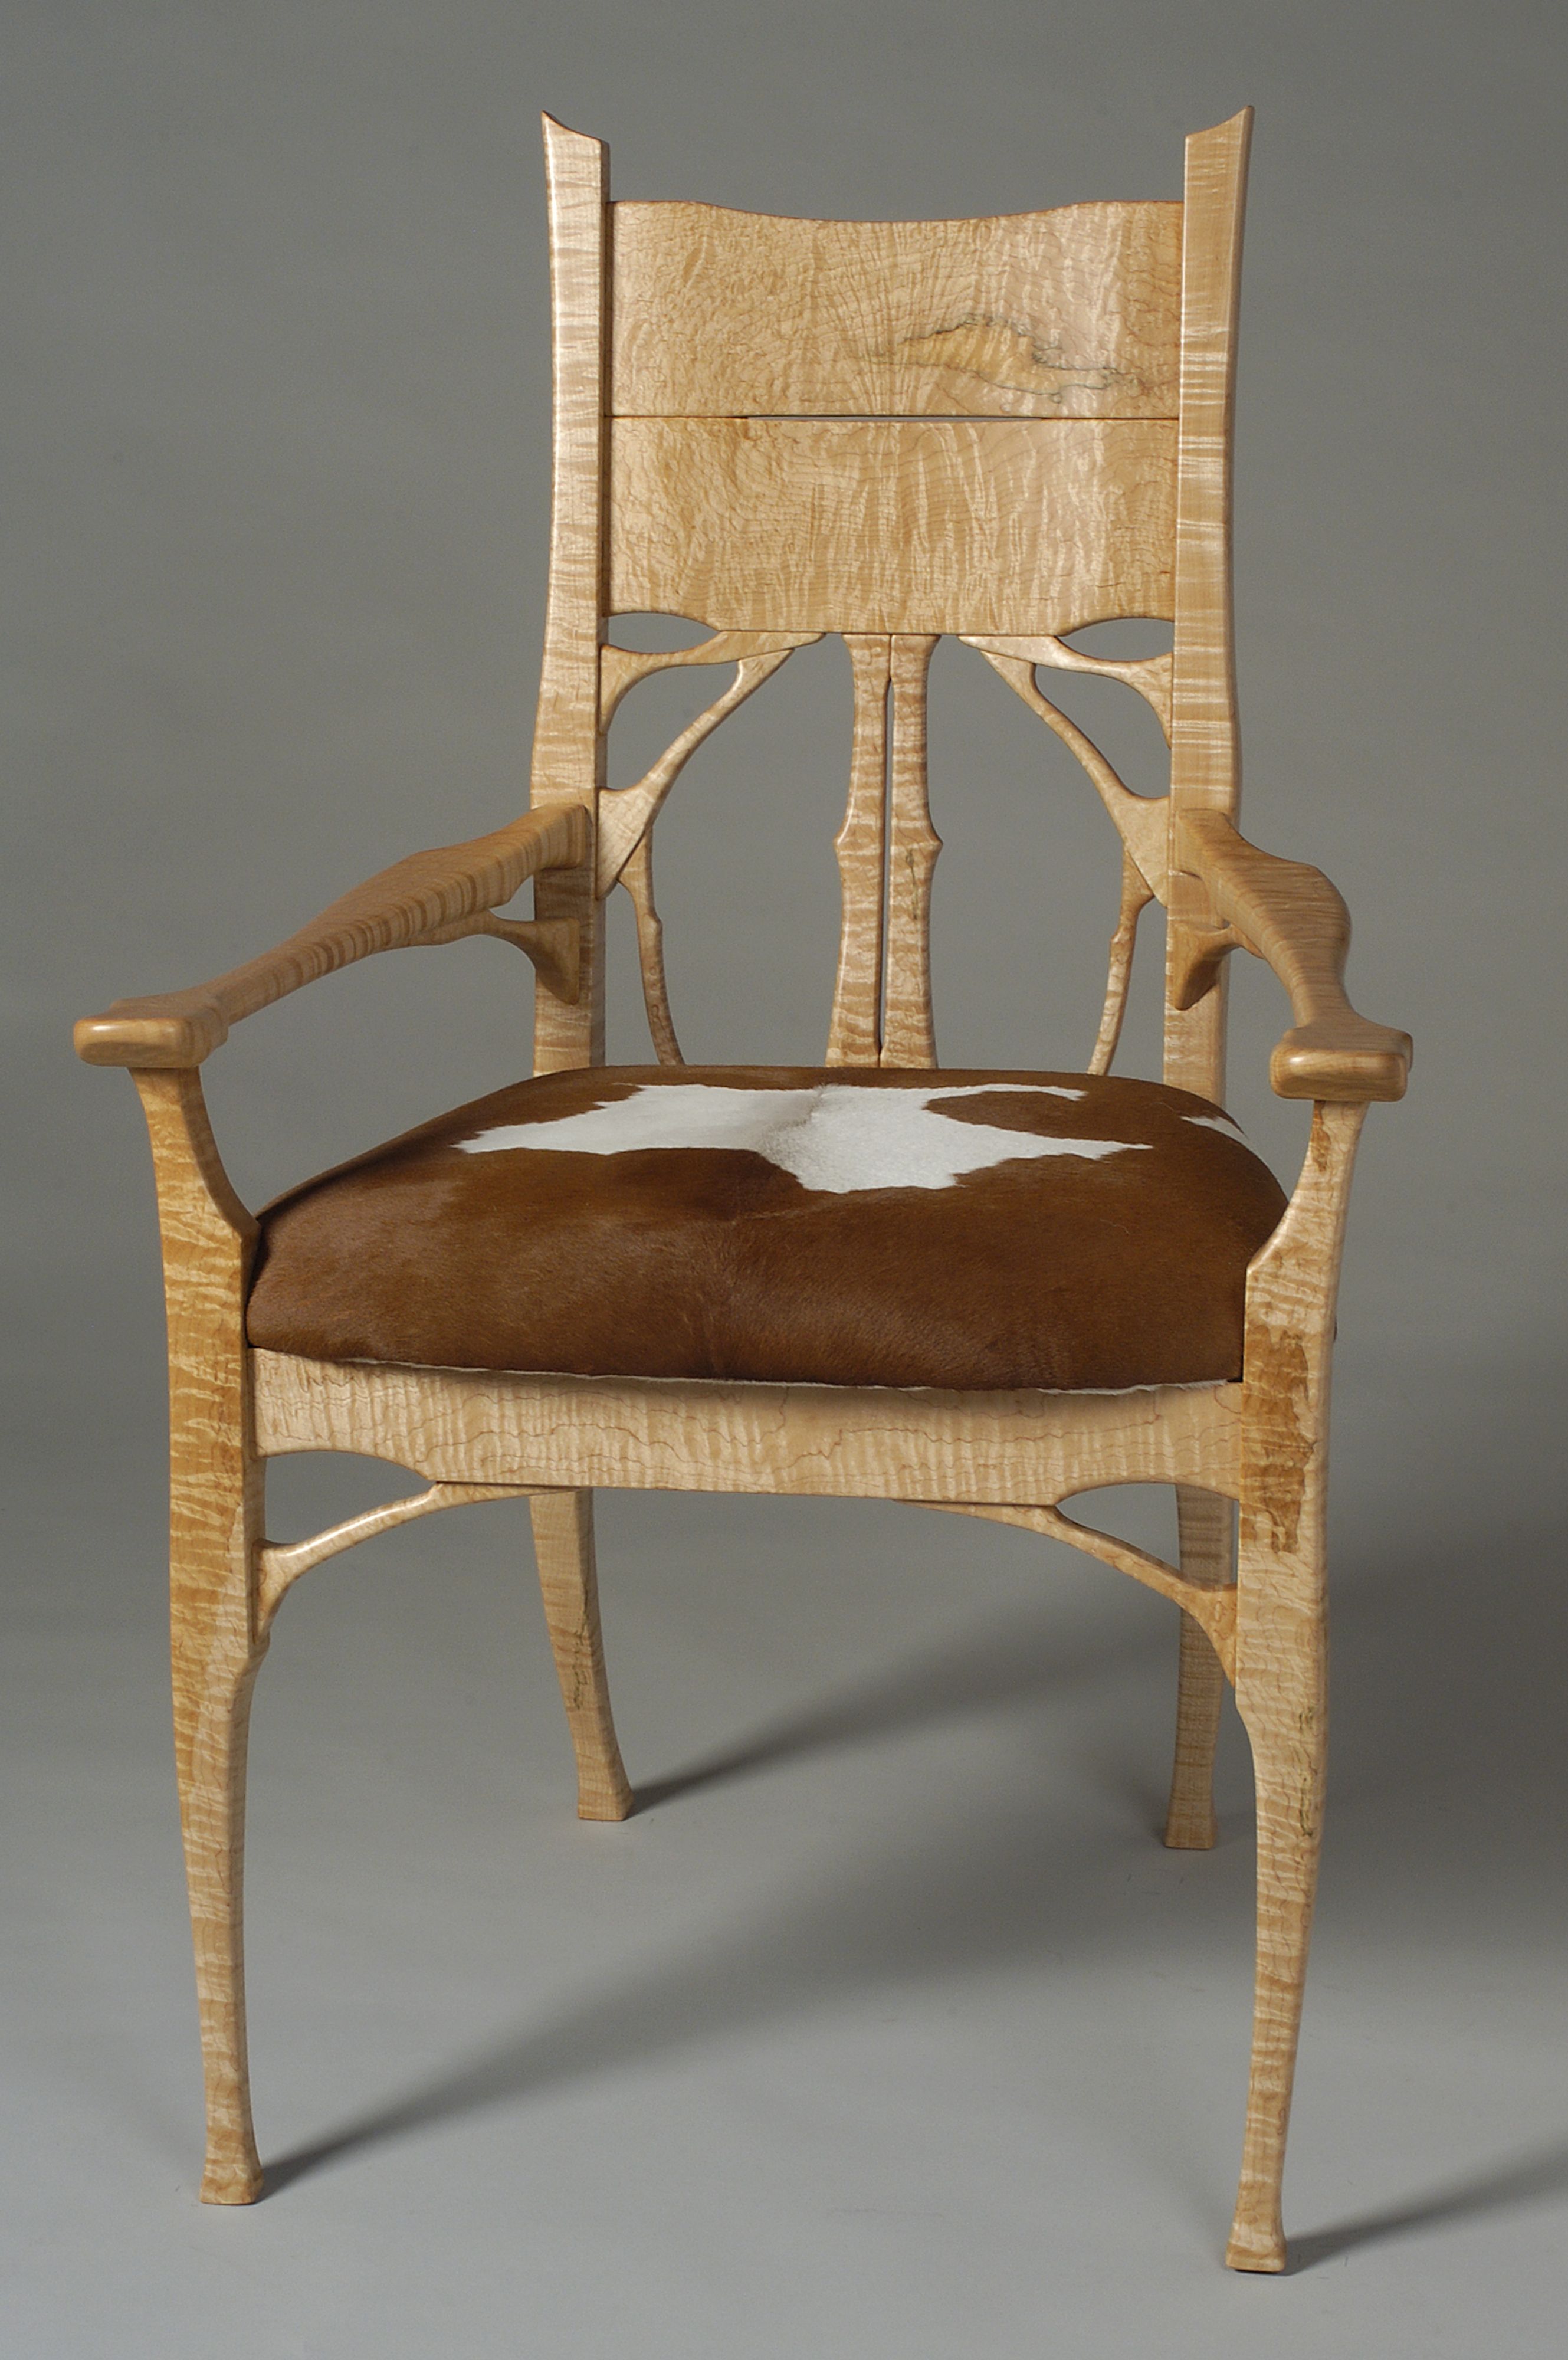 Custom Made Art Nouveau Dining Chair by Terry Bostwick Studio Furniture